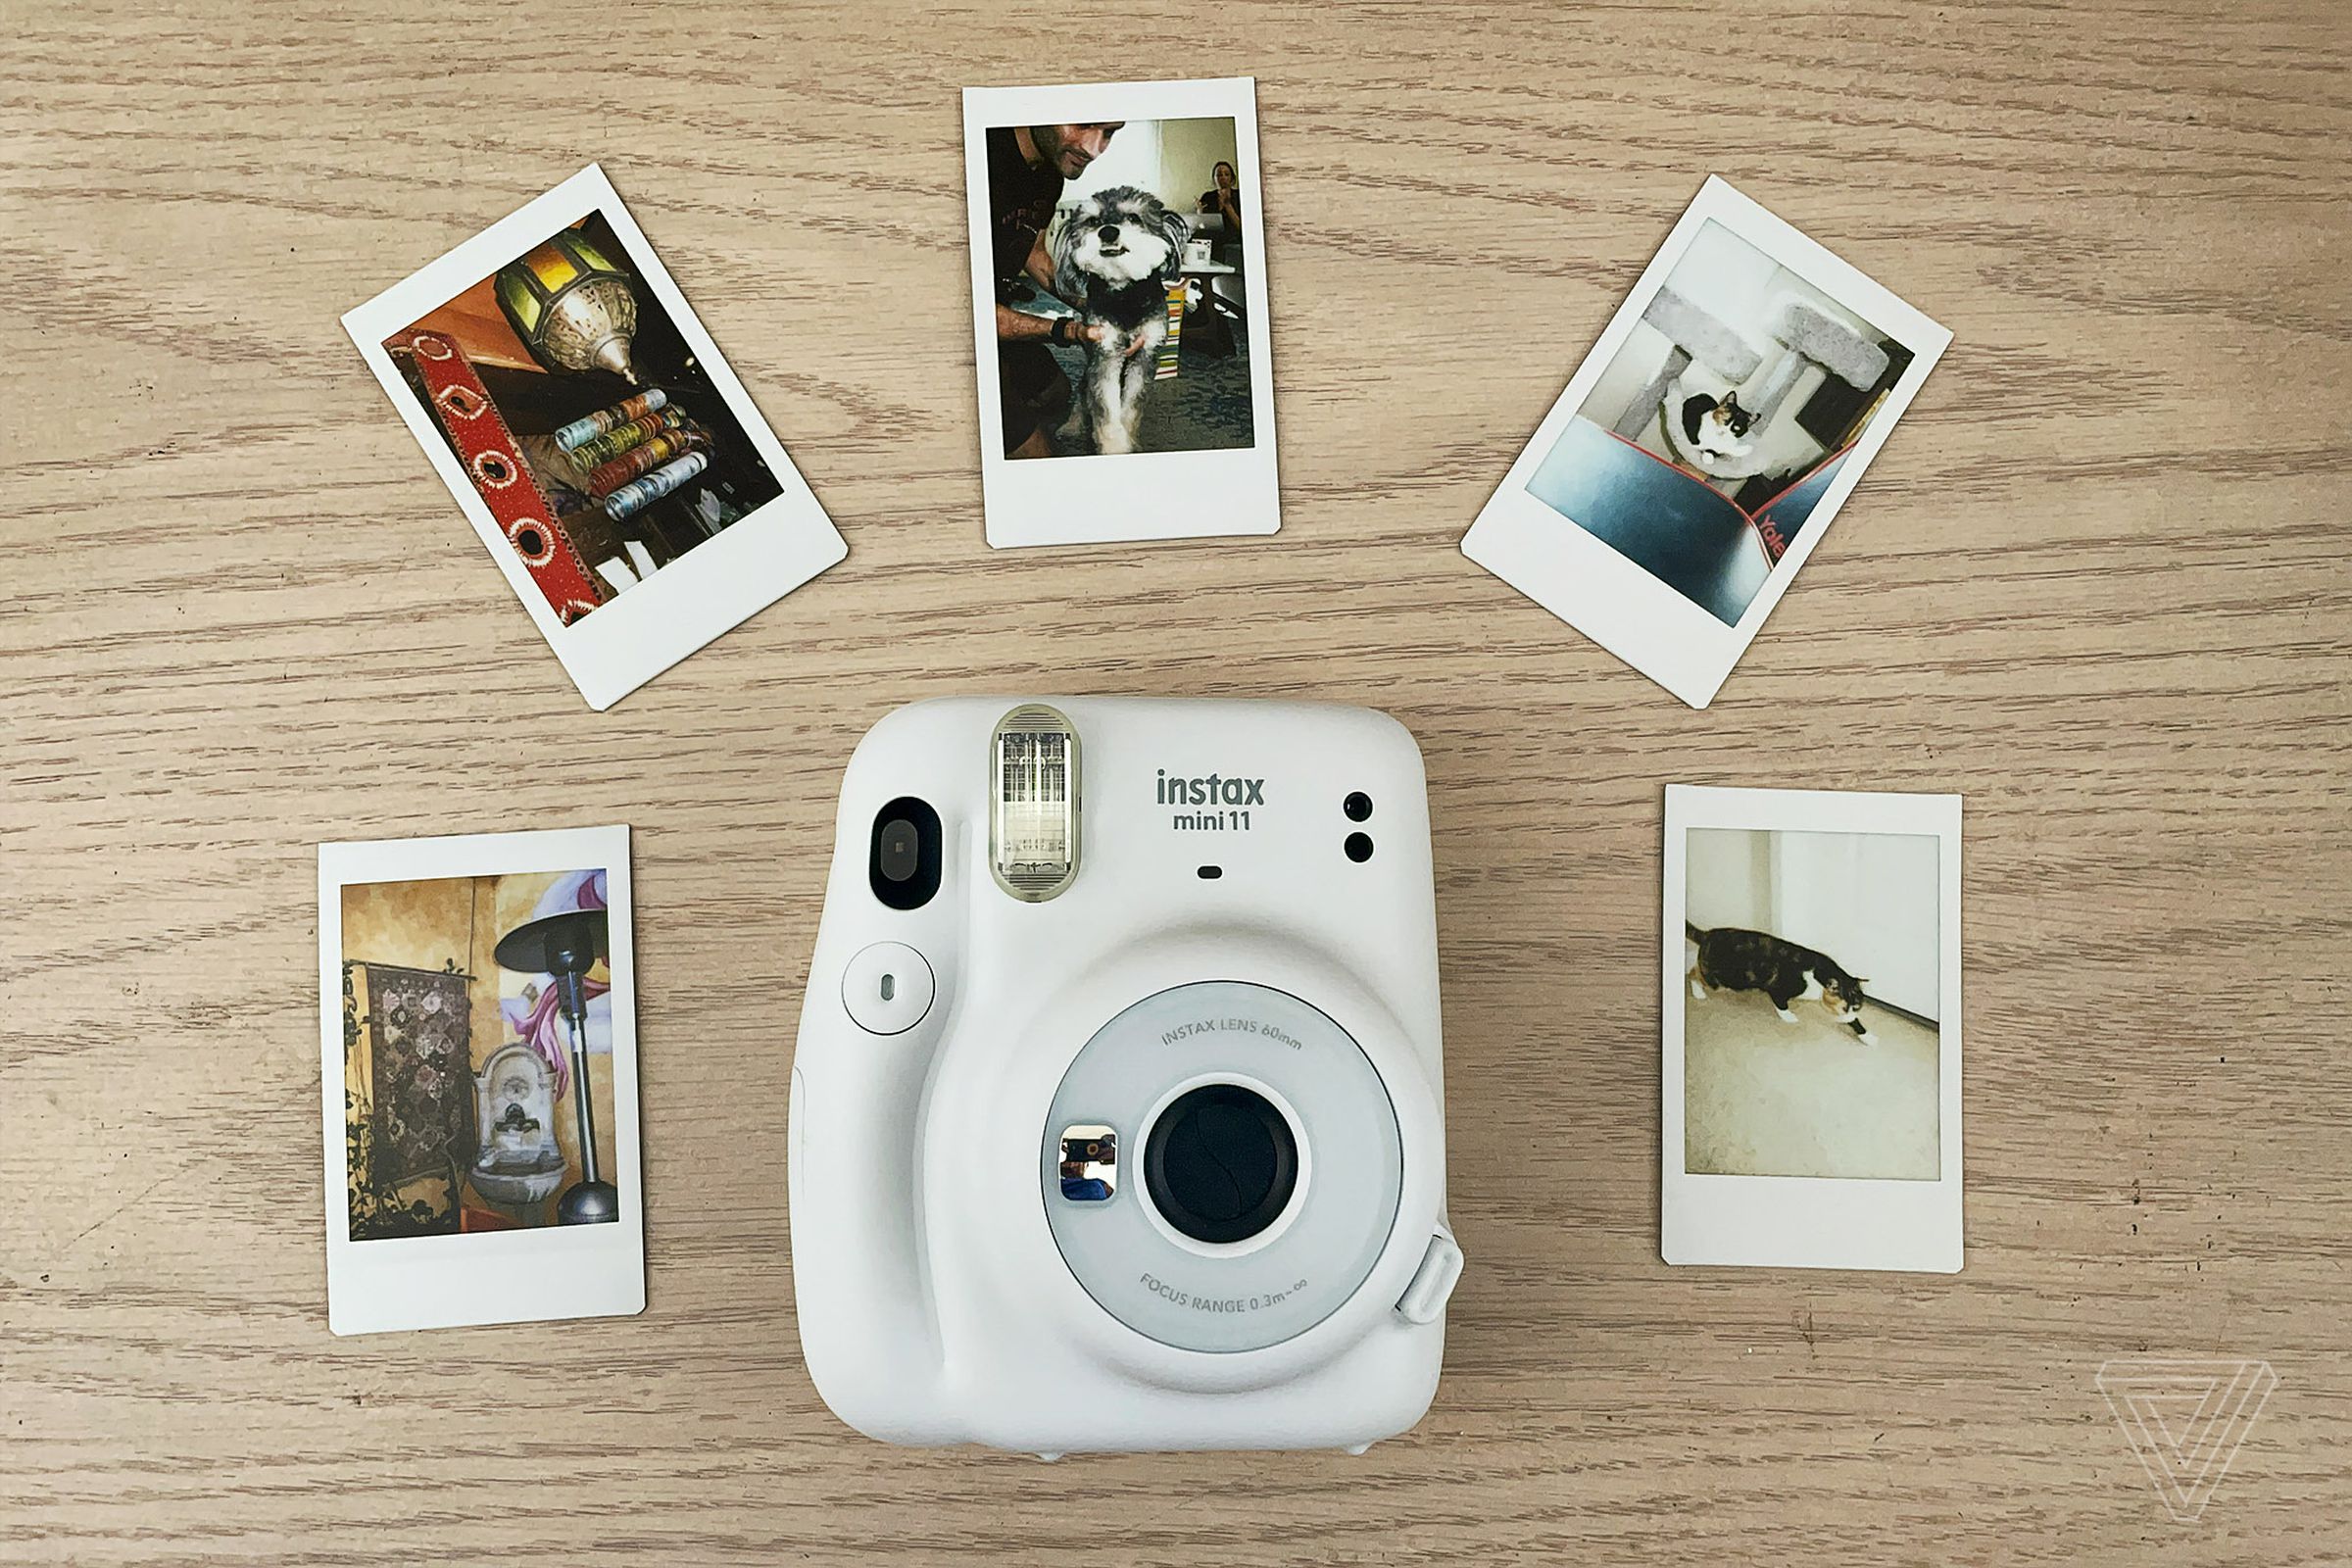 The Instax Mini 11 is as simple to use as it looks.